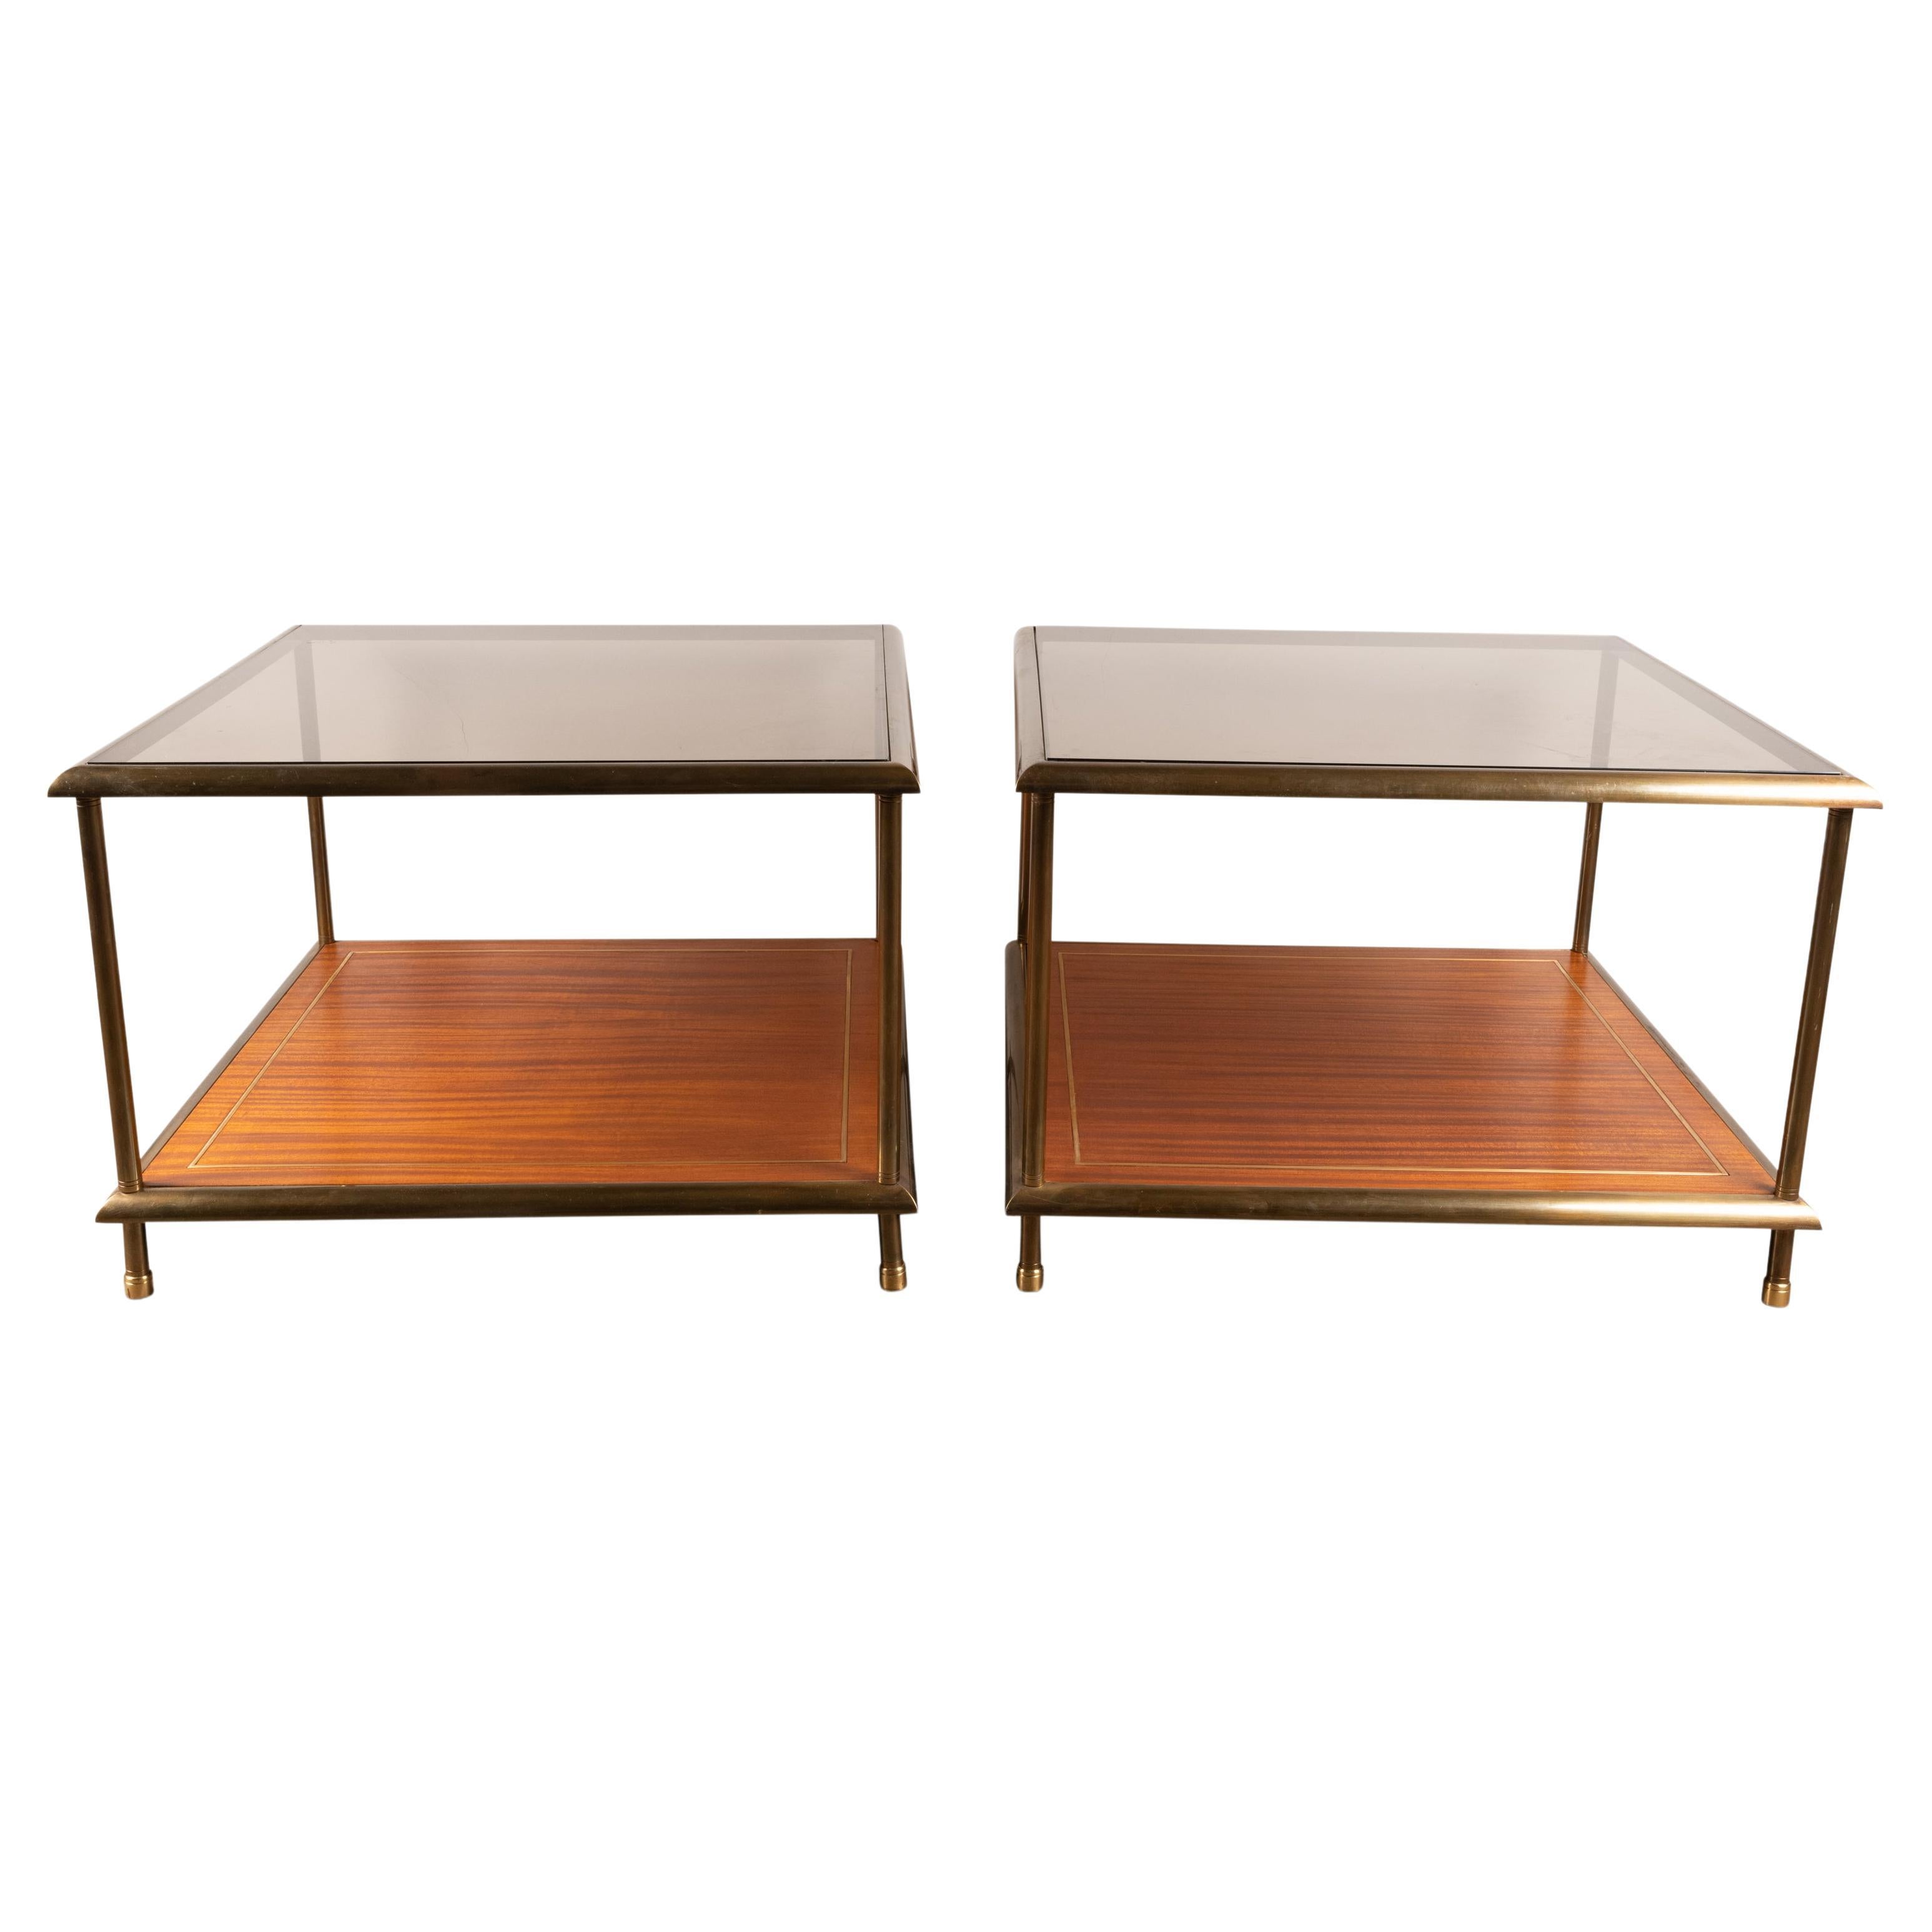 Pair of Square End Tables, France, 1960s